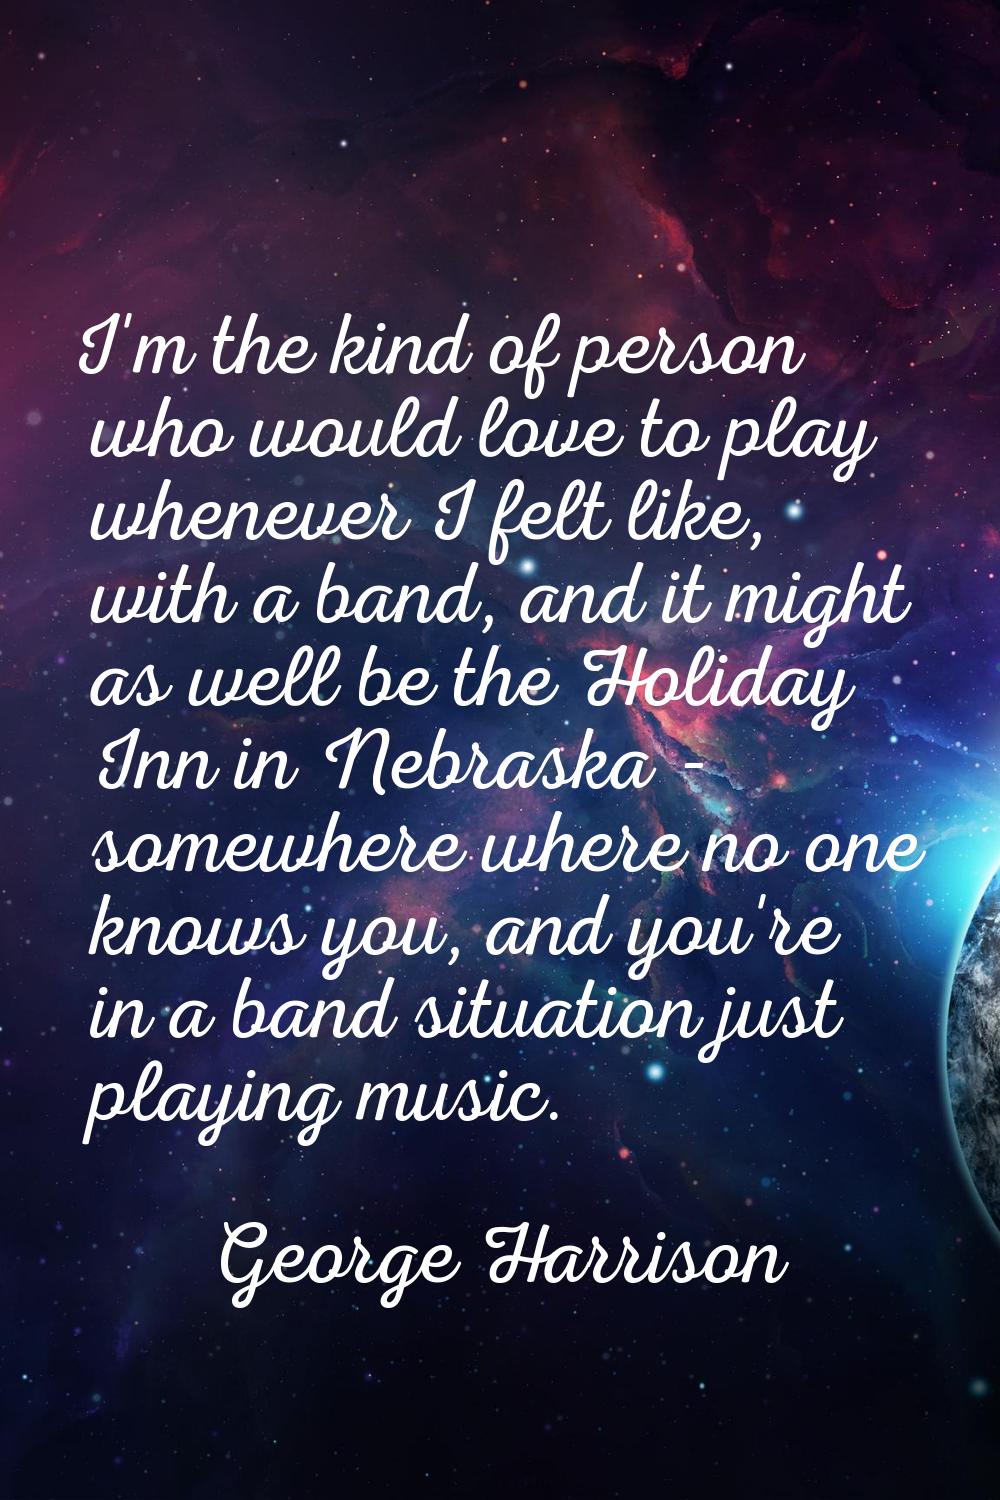 I'm the kind of person who would love to play whenever I felt like, with a band, and it might as we